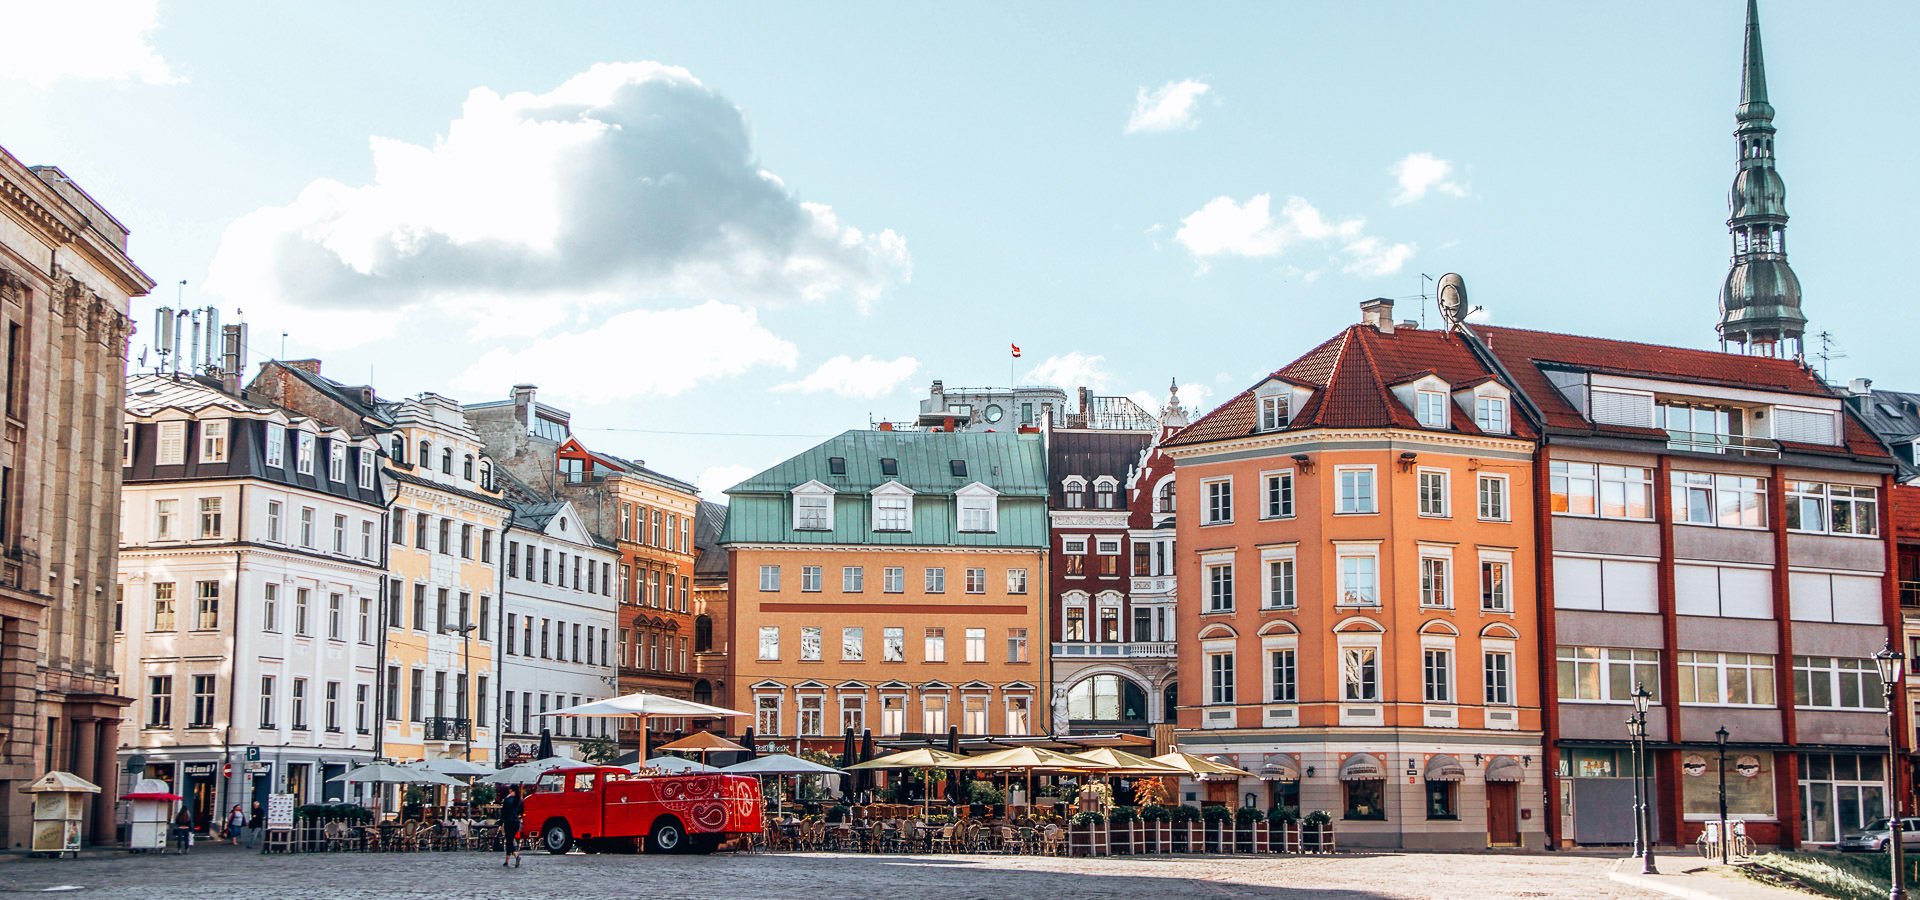 A Fabulous Guide To One Day In Riga Latvia | One Day in Riga Latvia 1